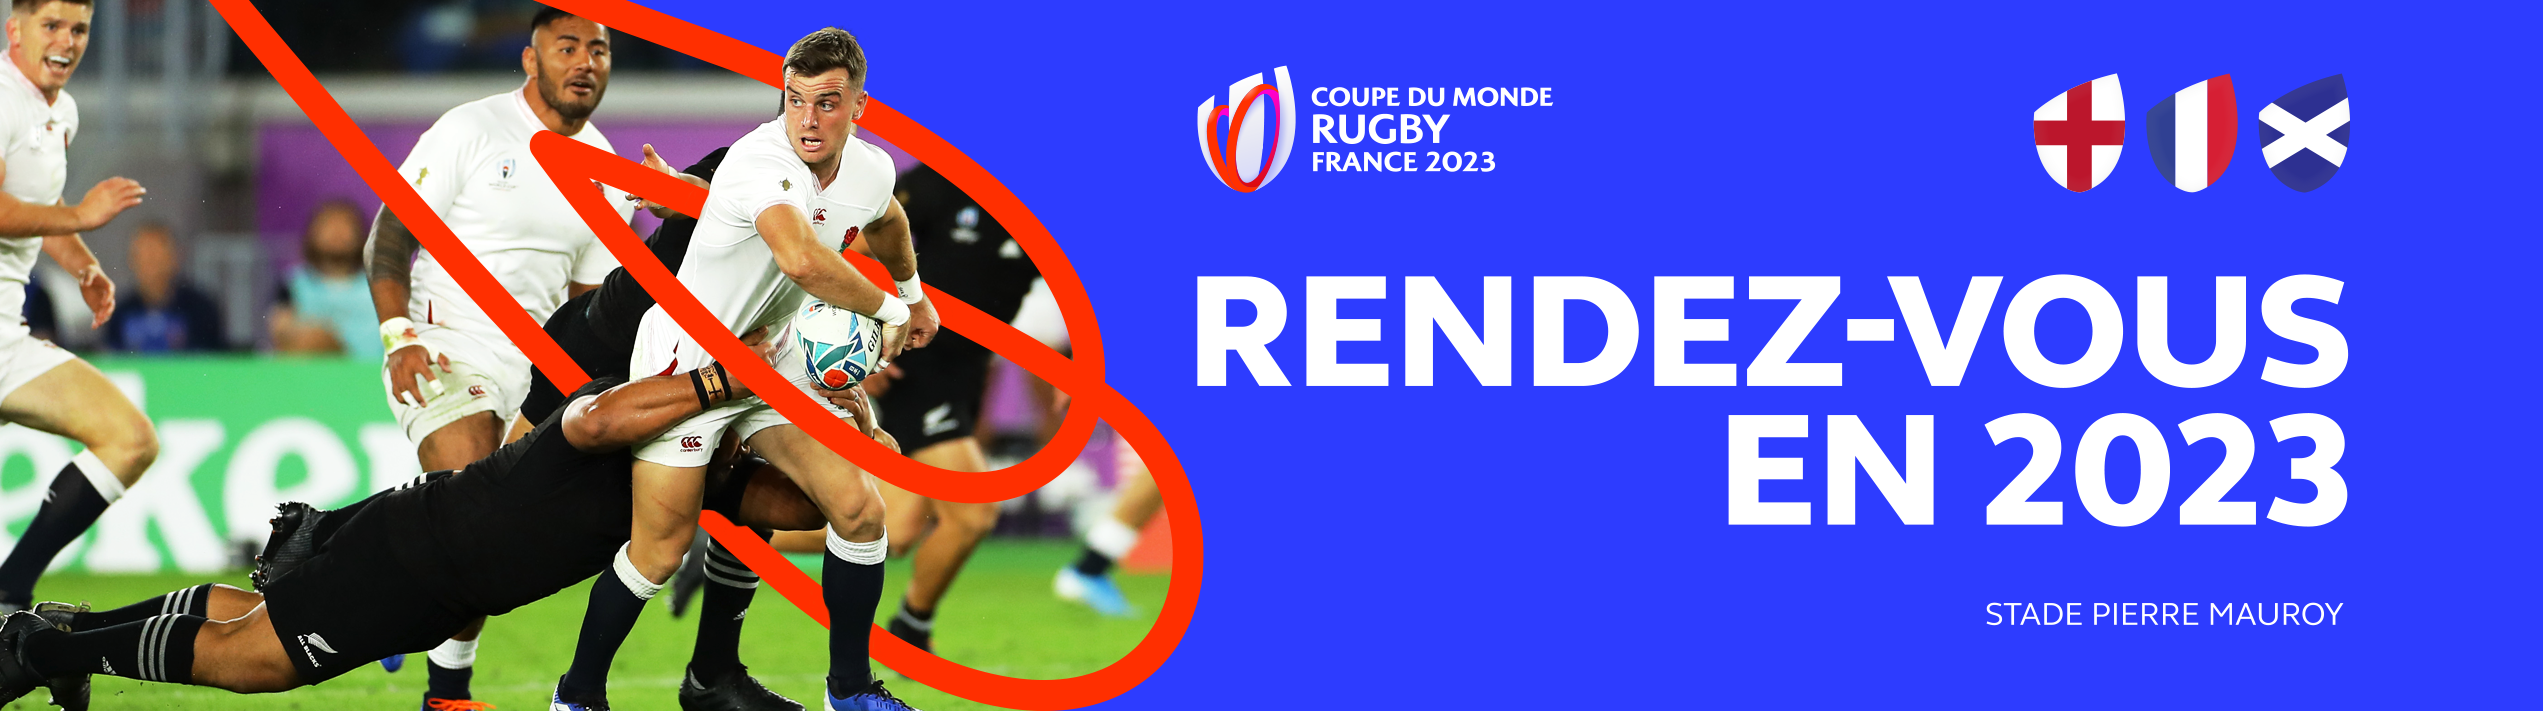 Sport - RUGBY WORLD CUP FRANCE 2023